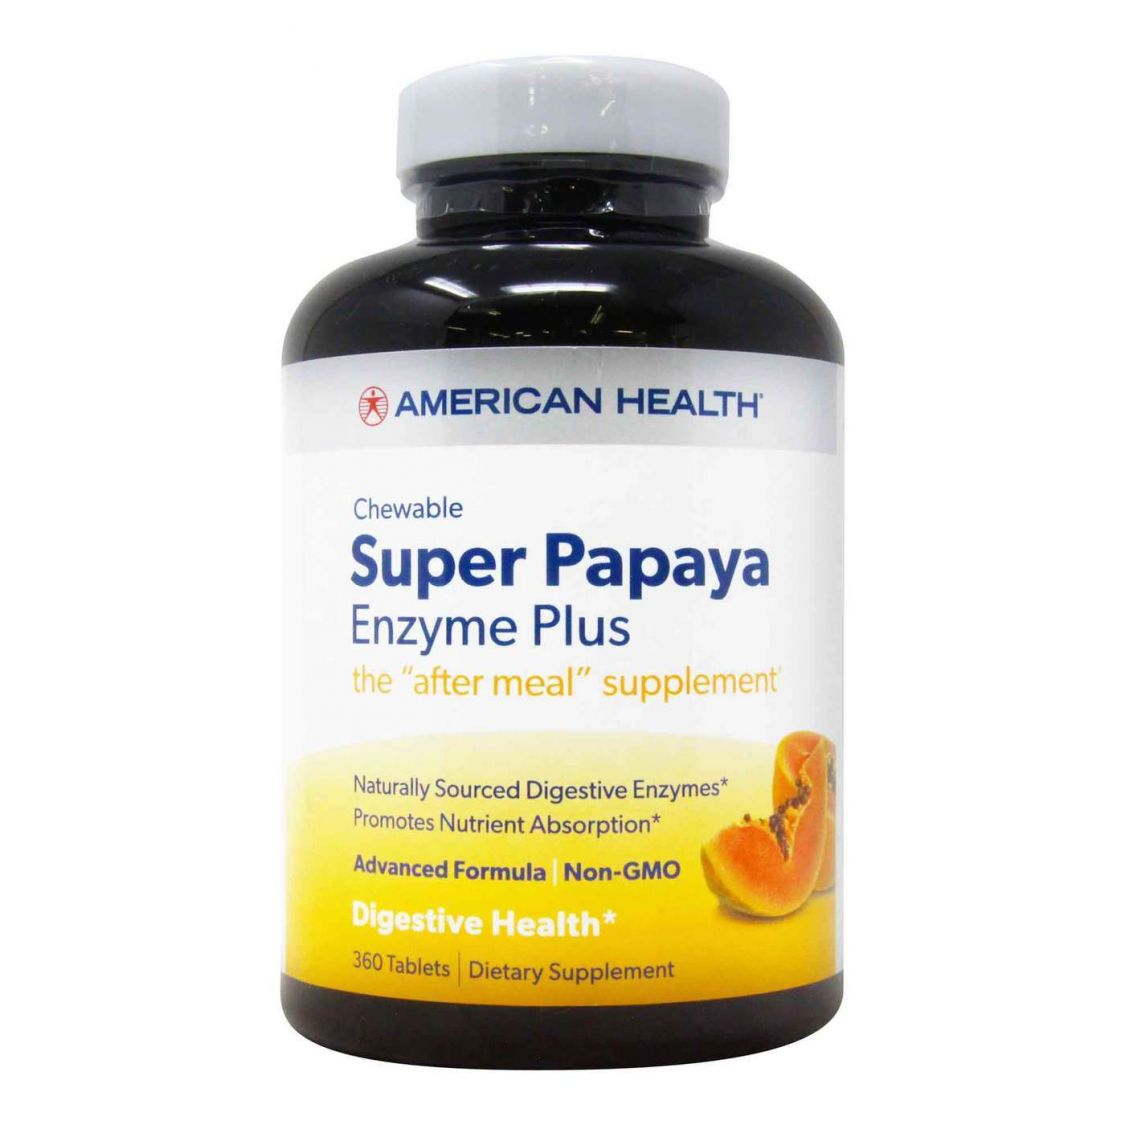 American Health Super Papaya Enzyme Plus Chewable High Potency - 360 Chewable Tablets Capsules / Tablets Chewable